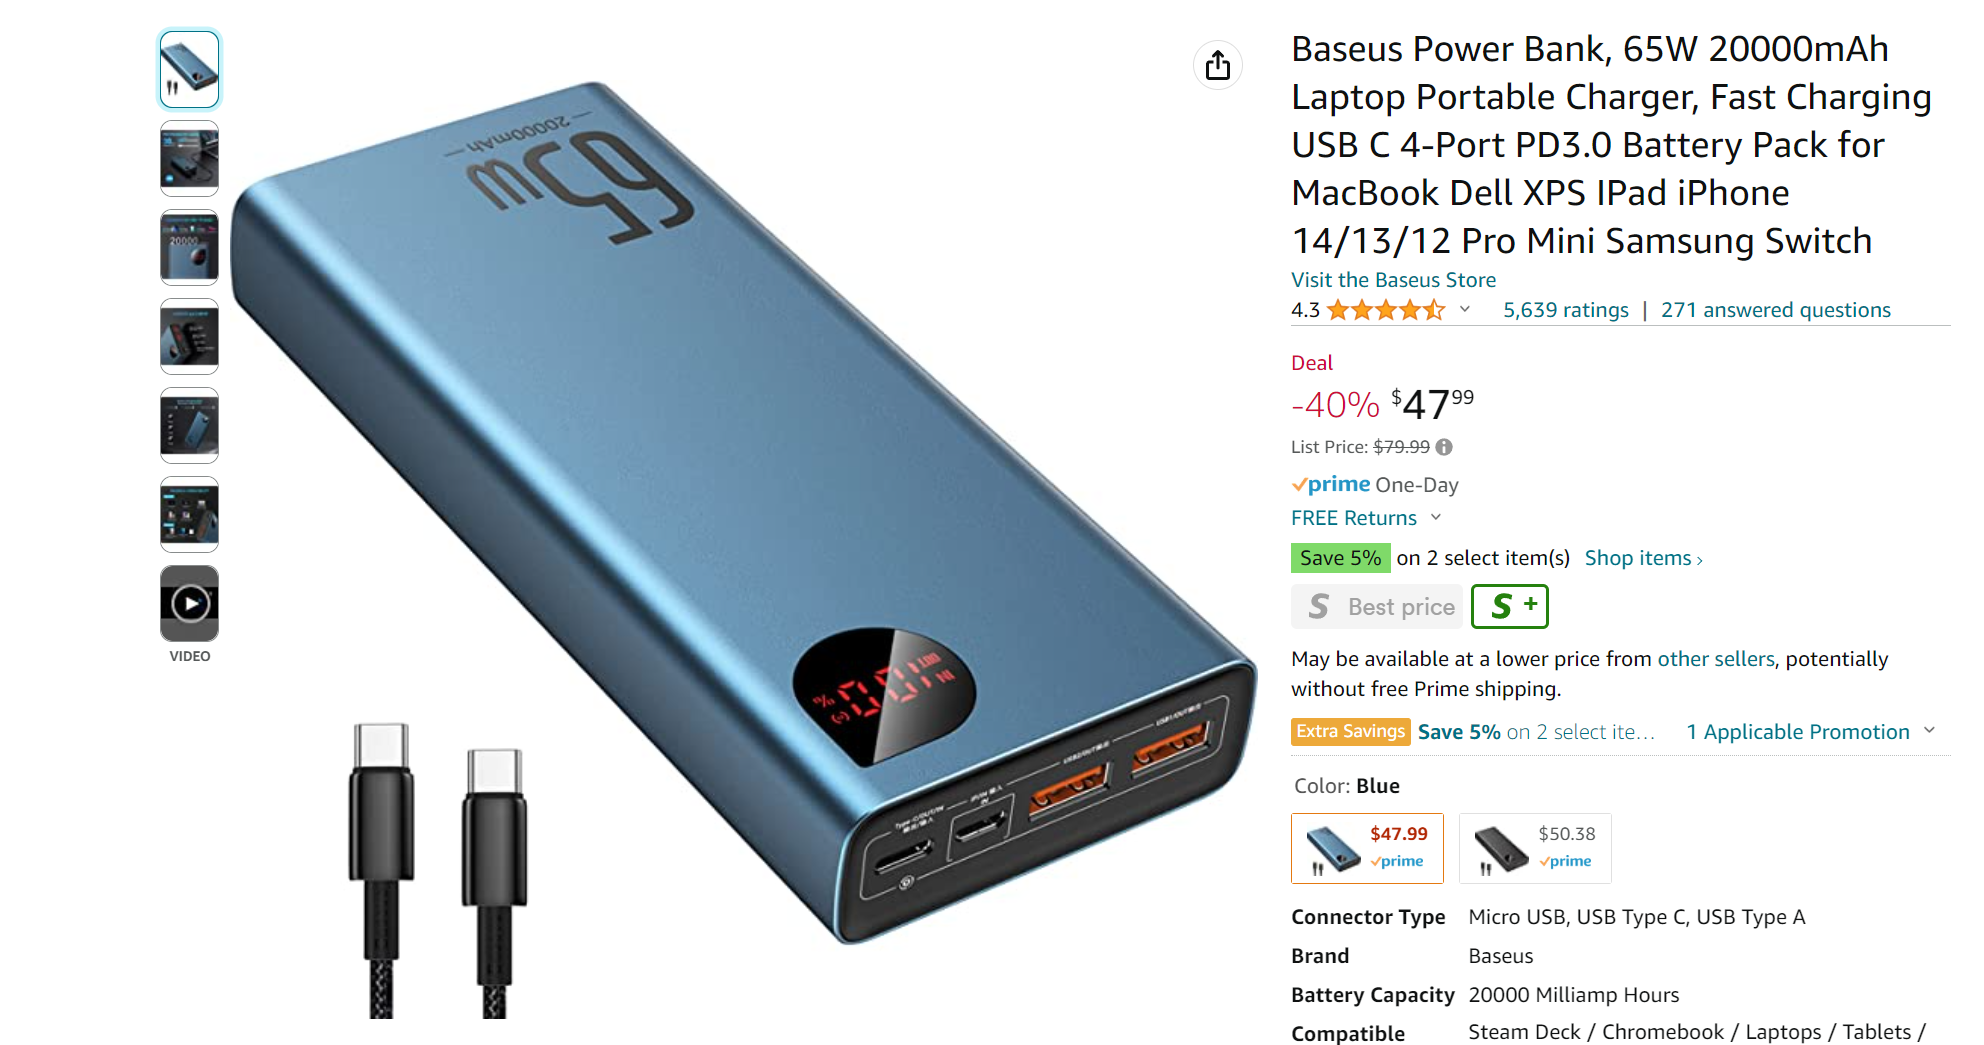 Baseus Power Bank, 65W 20000mAh Laptop Portable Charger, Fast Charging USB  C 4-Port PD3.0 Battery Pack for MacBook Dell XPS IPad iPhone 14/13/12 Pro  Mini Samsung Switch 